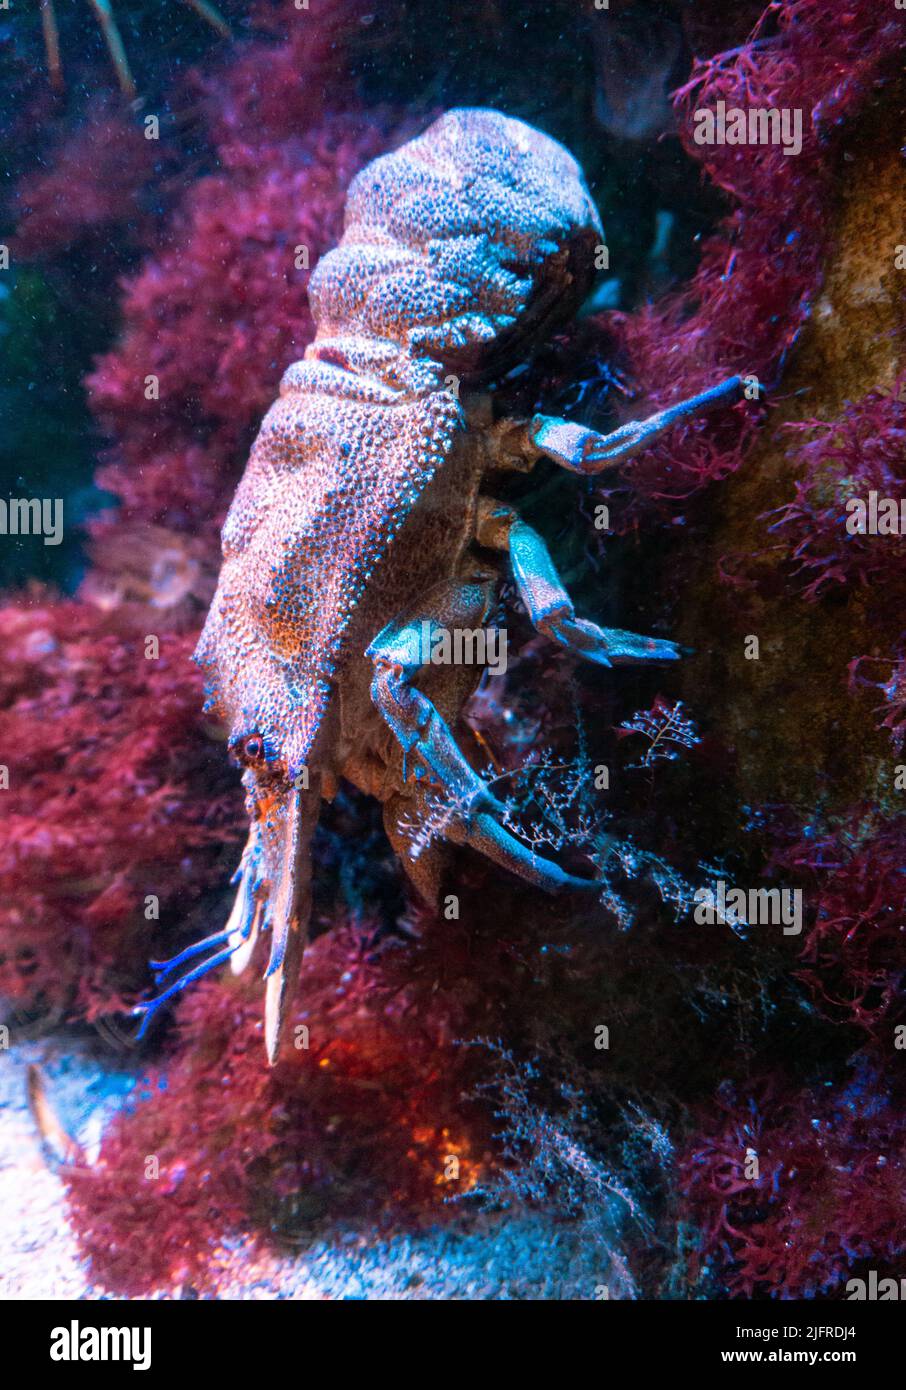 A large crustacean with many legs and massive pliers, descends a stone full of corals and multicolored plants. Stock Photo